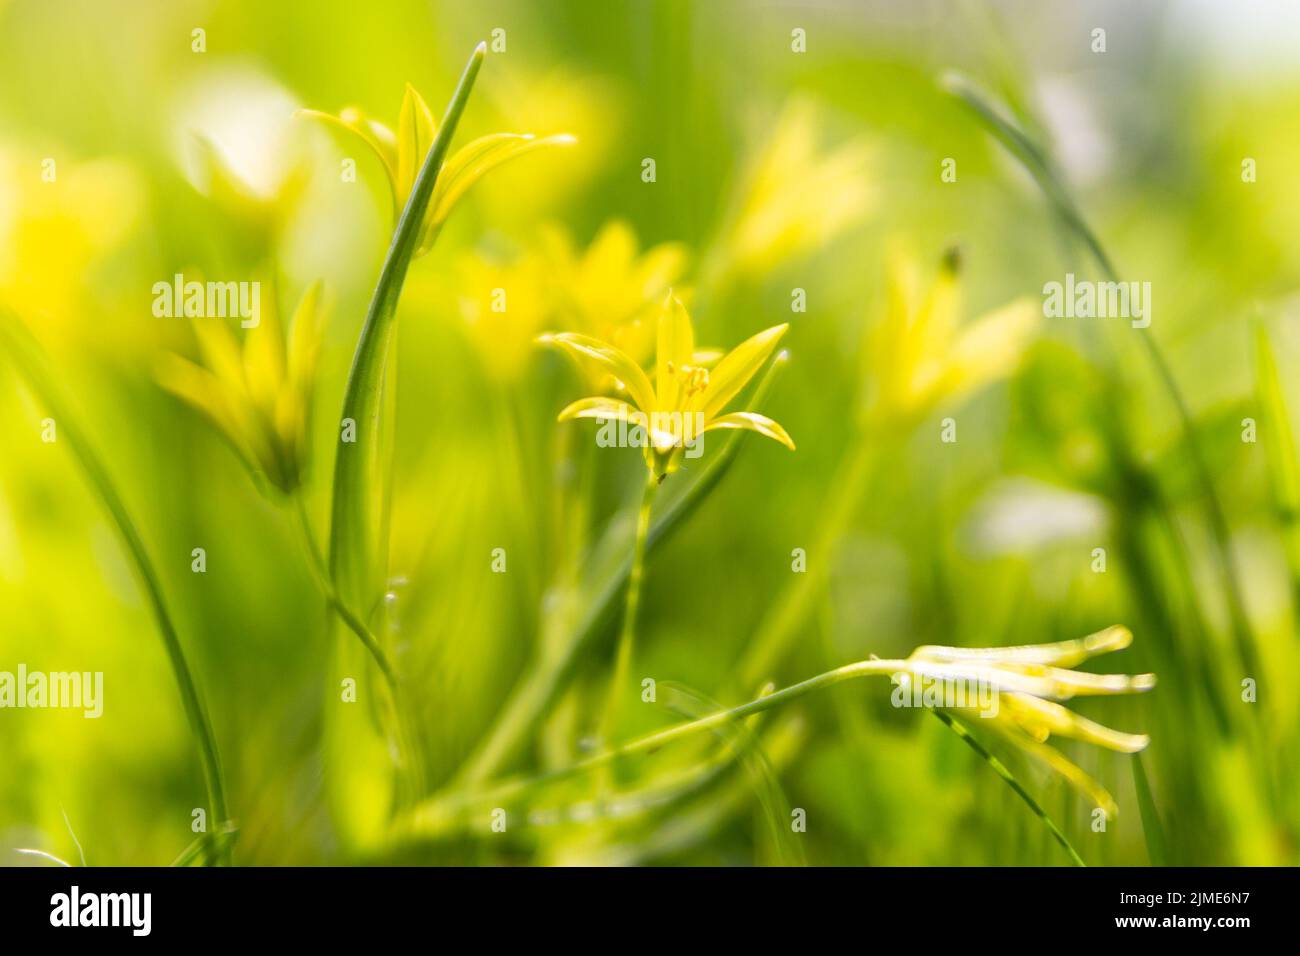 Yellow small flower on a light green background in early spring. Photographed close up, picturesque. Stock Photo